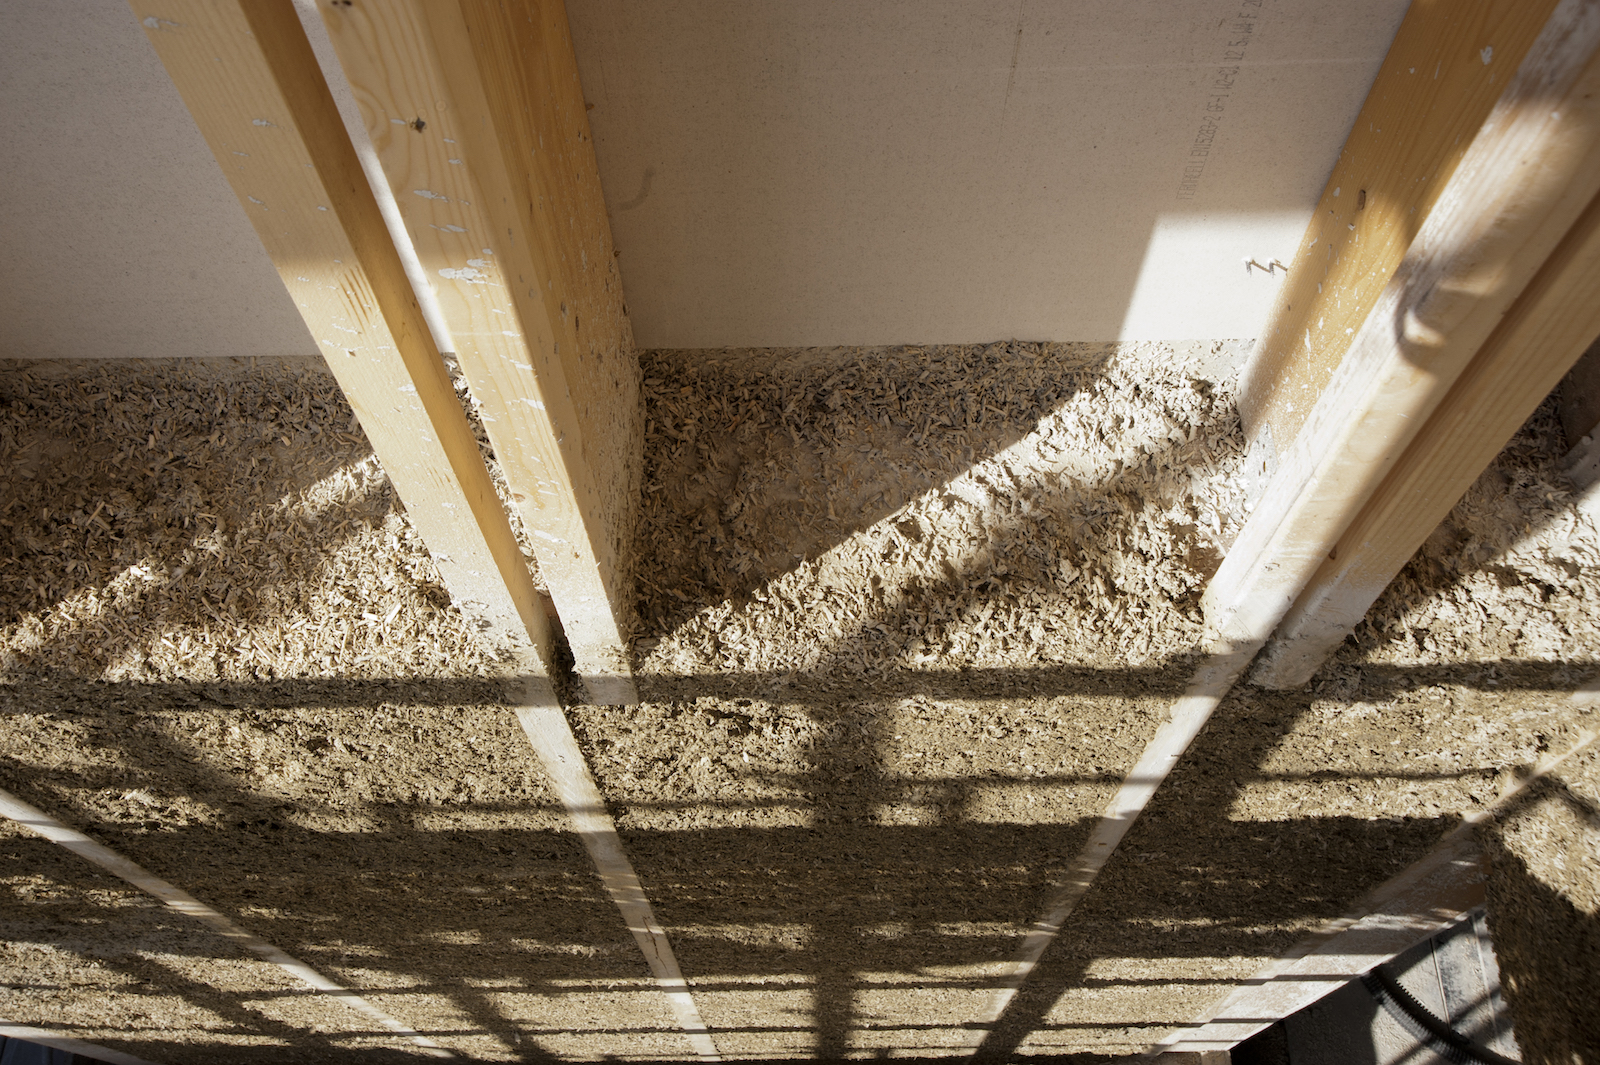 a photo of a top-down view of the inside of a wall. Long wooden beams run in parallel. In between, grayish rectangles of "hempcrete" fill in the gaps. It is porous-looking like a sponge.